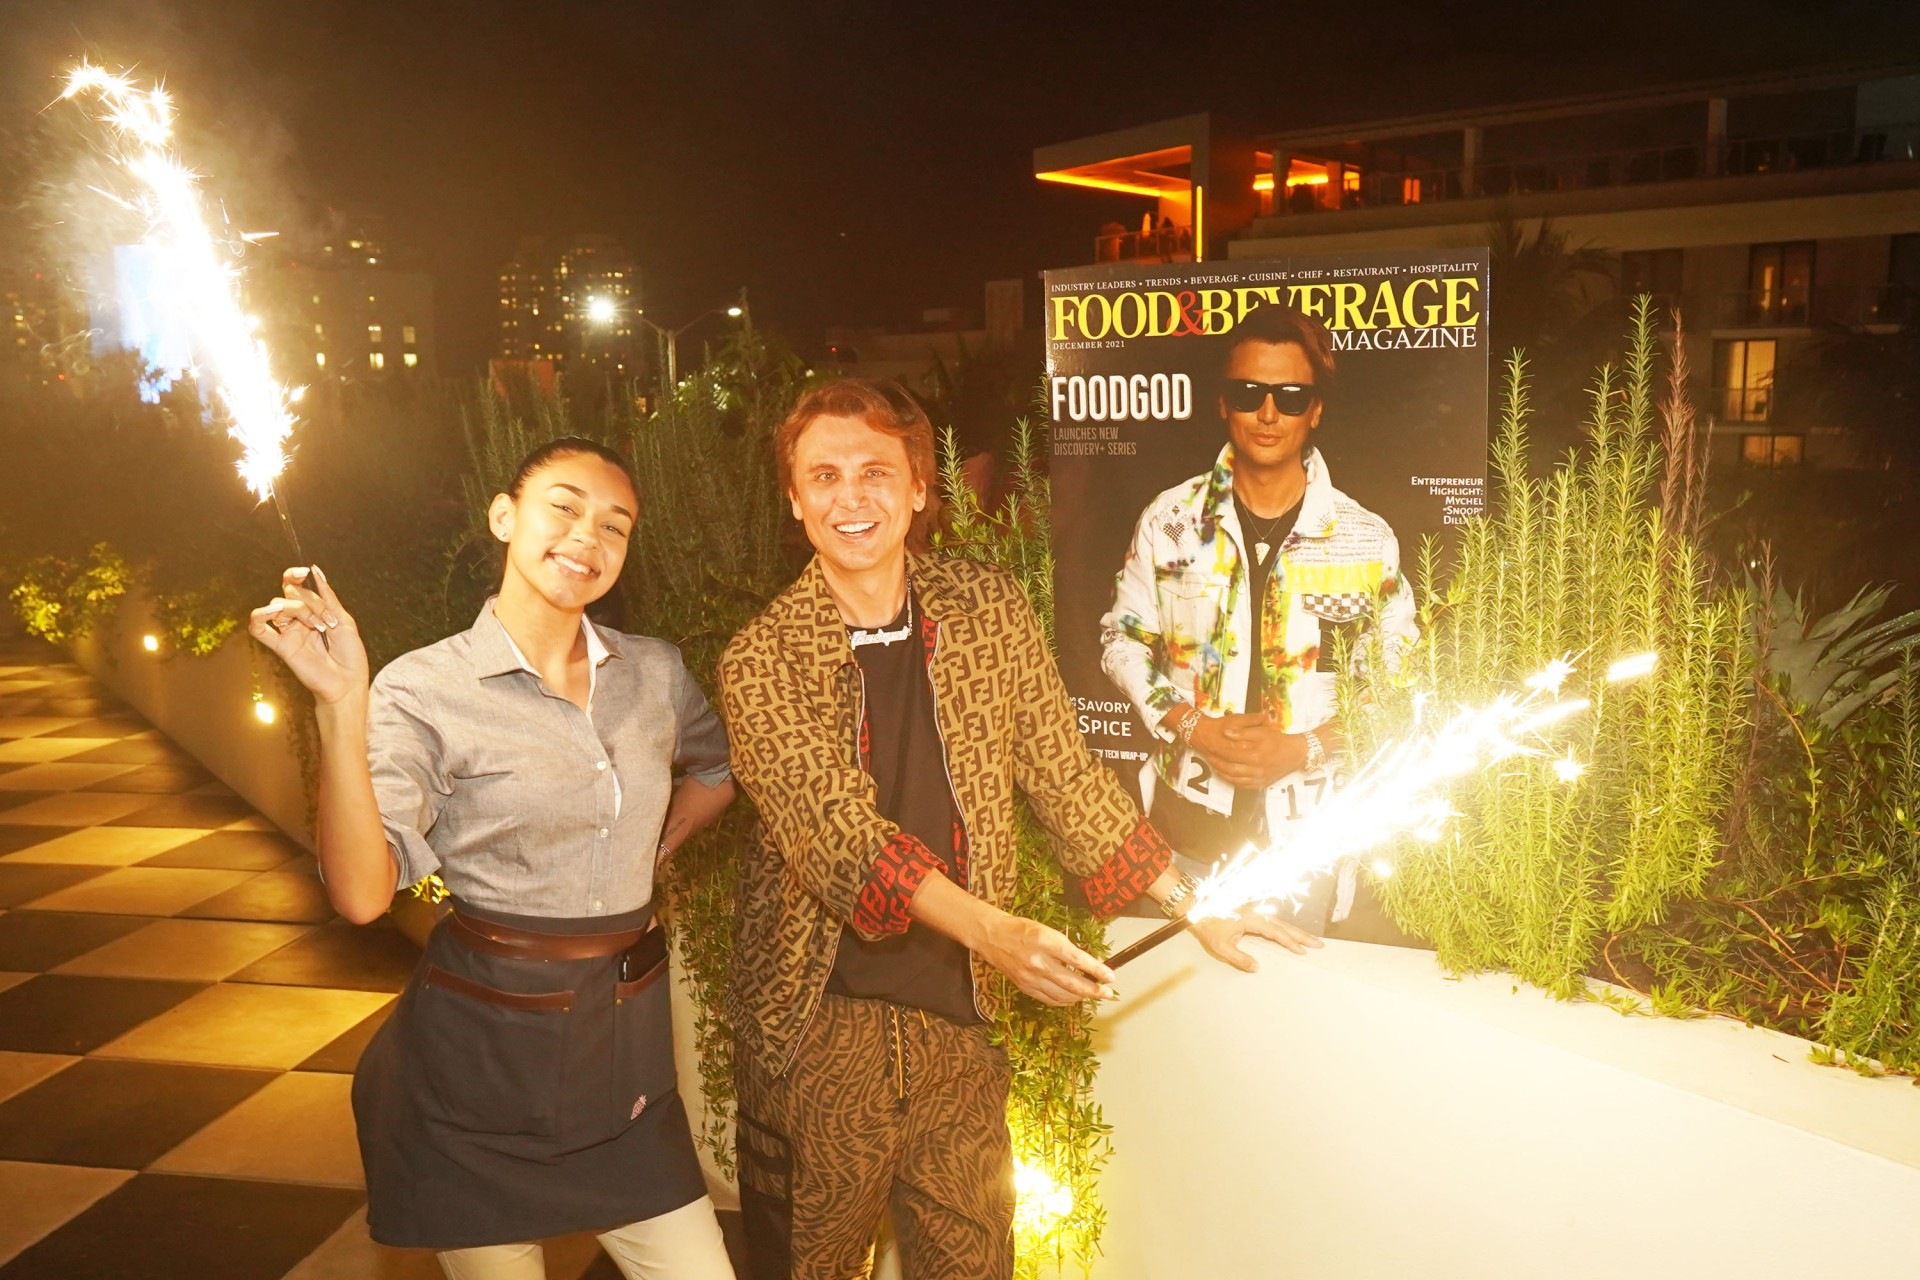 Foodgod Celebrates his Food &#038; Beverage Magazine December Issue Cover at Strawberry Moon